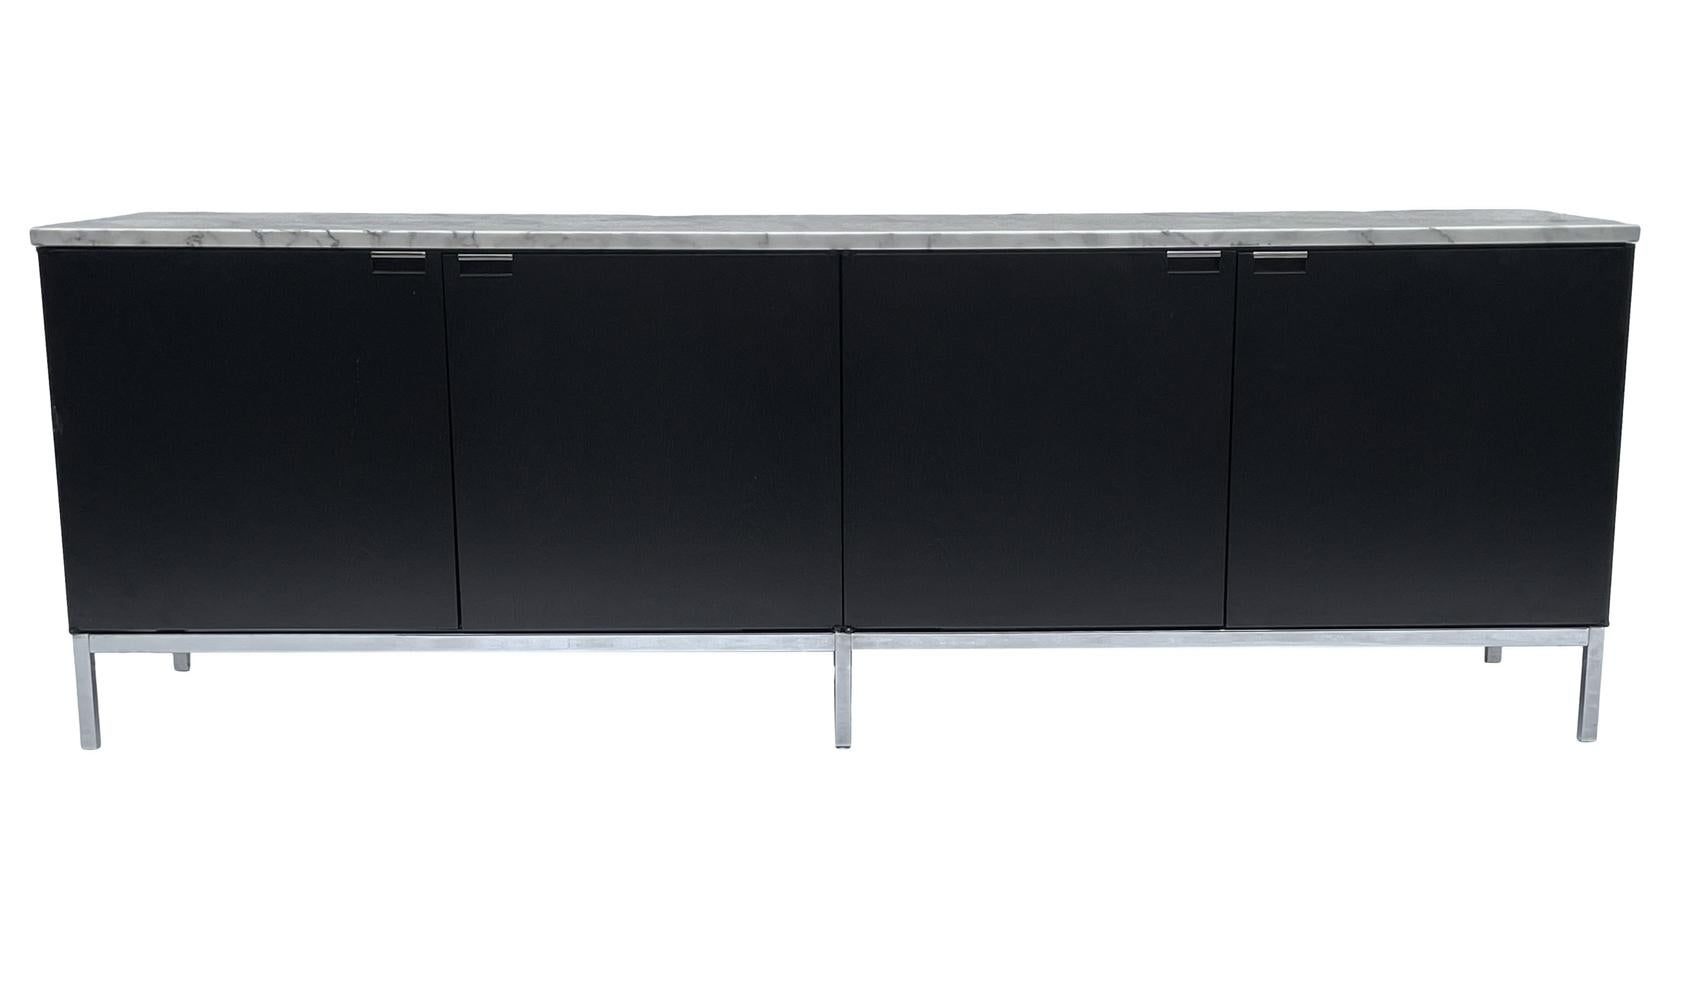 A classic simple modern credenza cabinet by Florence Knoll for Knoll. The cabinet features ebony stained oak with calacatta marble top. In beautiful condition.